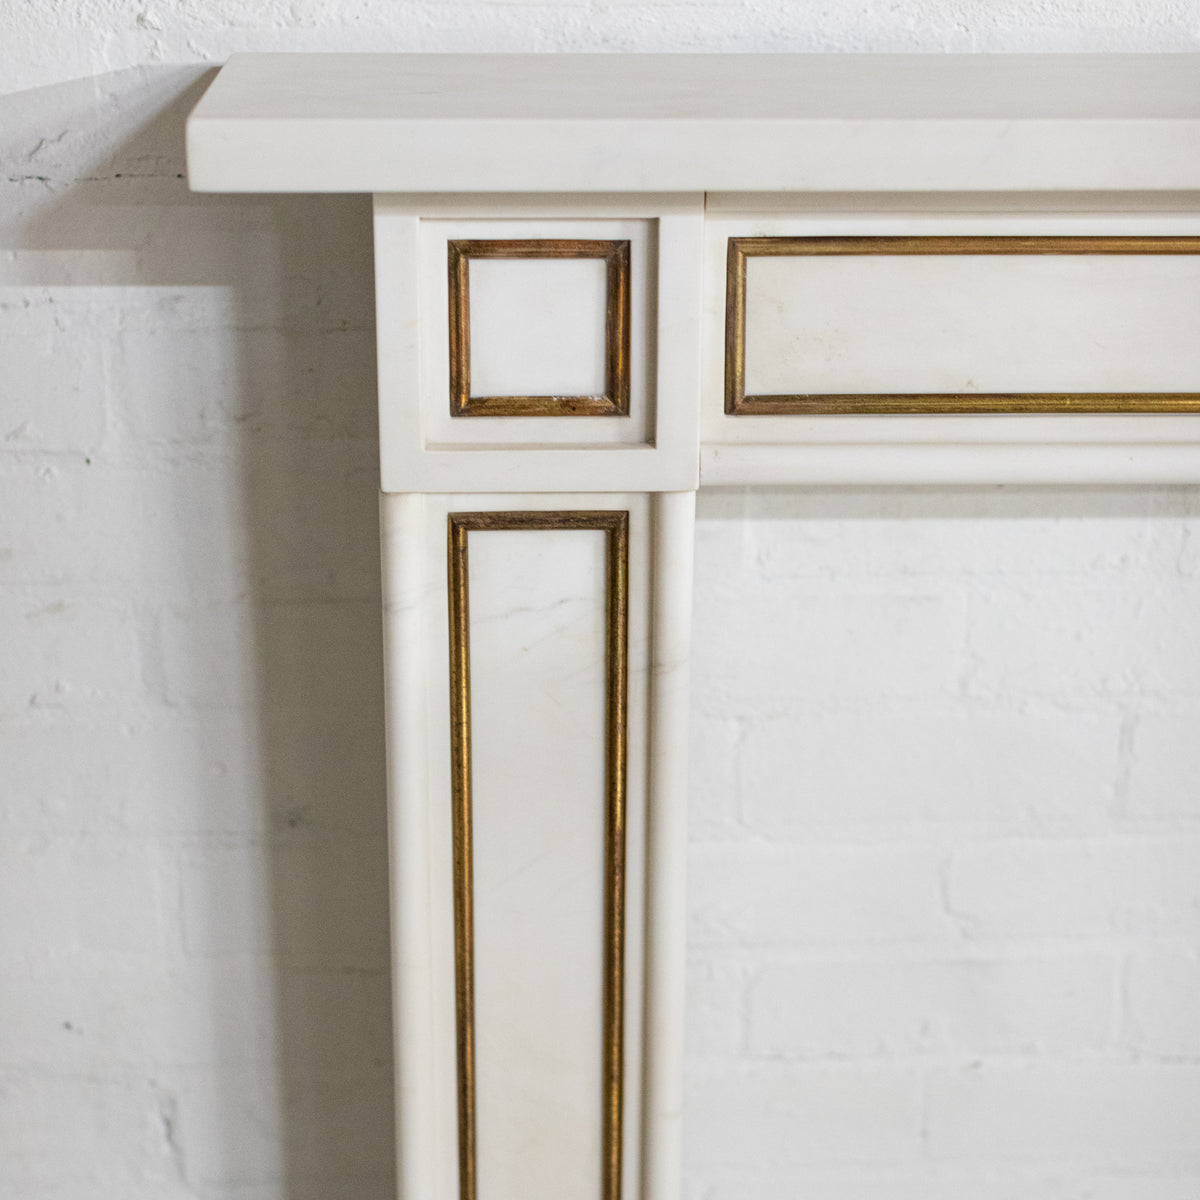 Reclaimed Statuary Marble Fireplace Surround with Brass Detail | The Architectural Forum